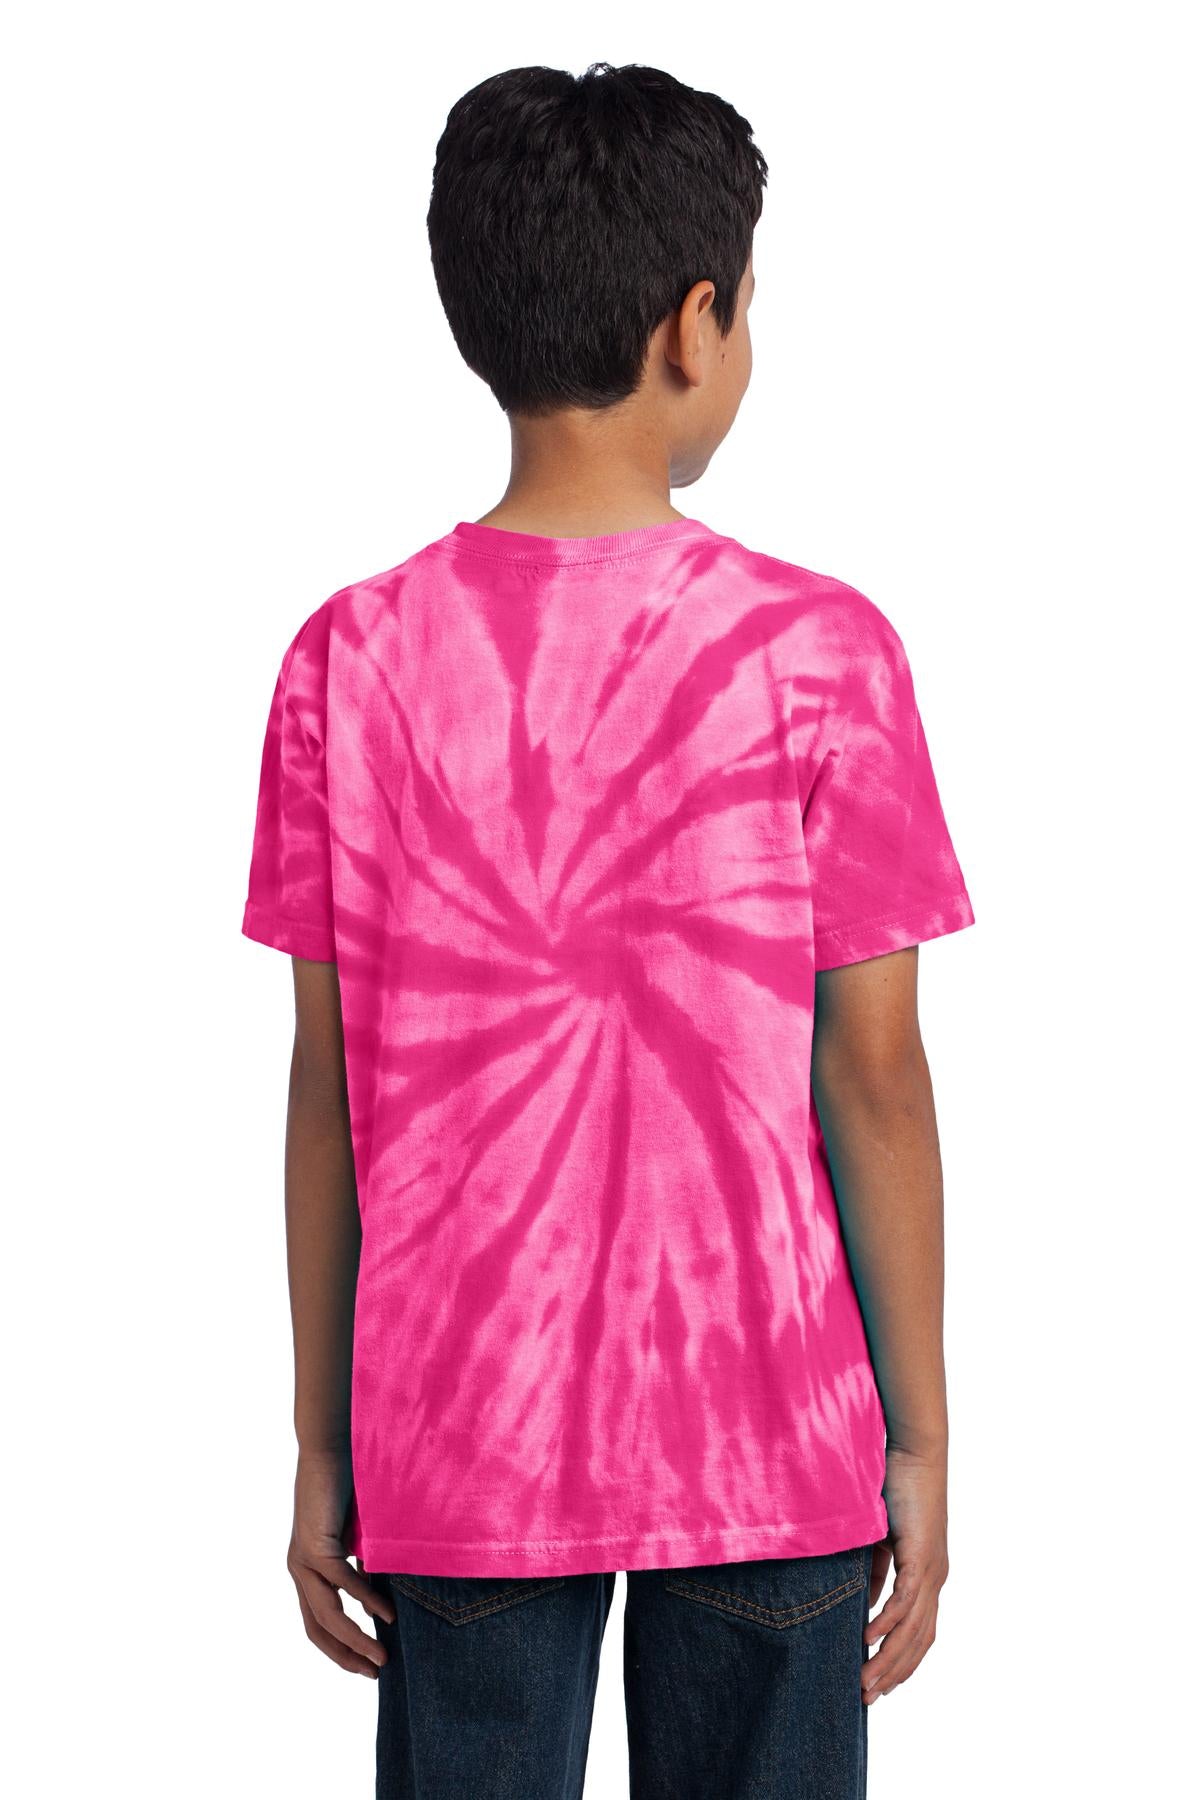 Port & Company - Youth Tie-Dye Tee. PC147Y - Pink